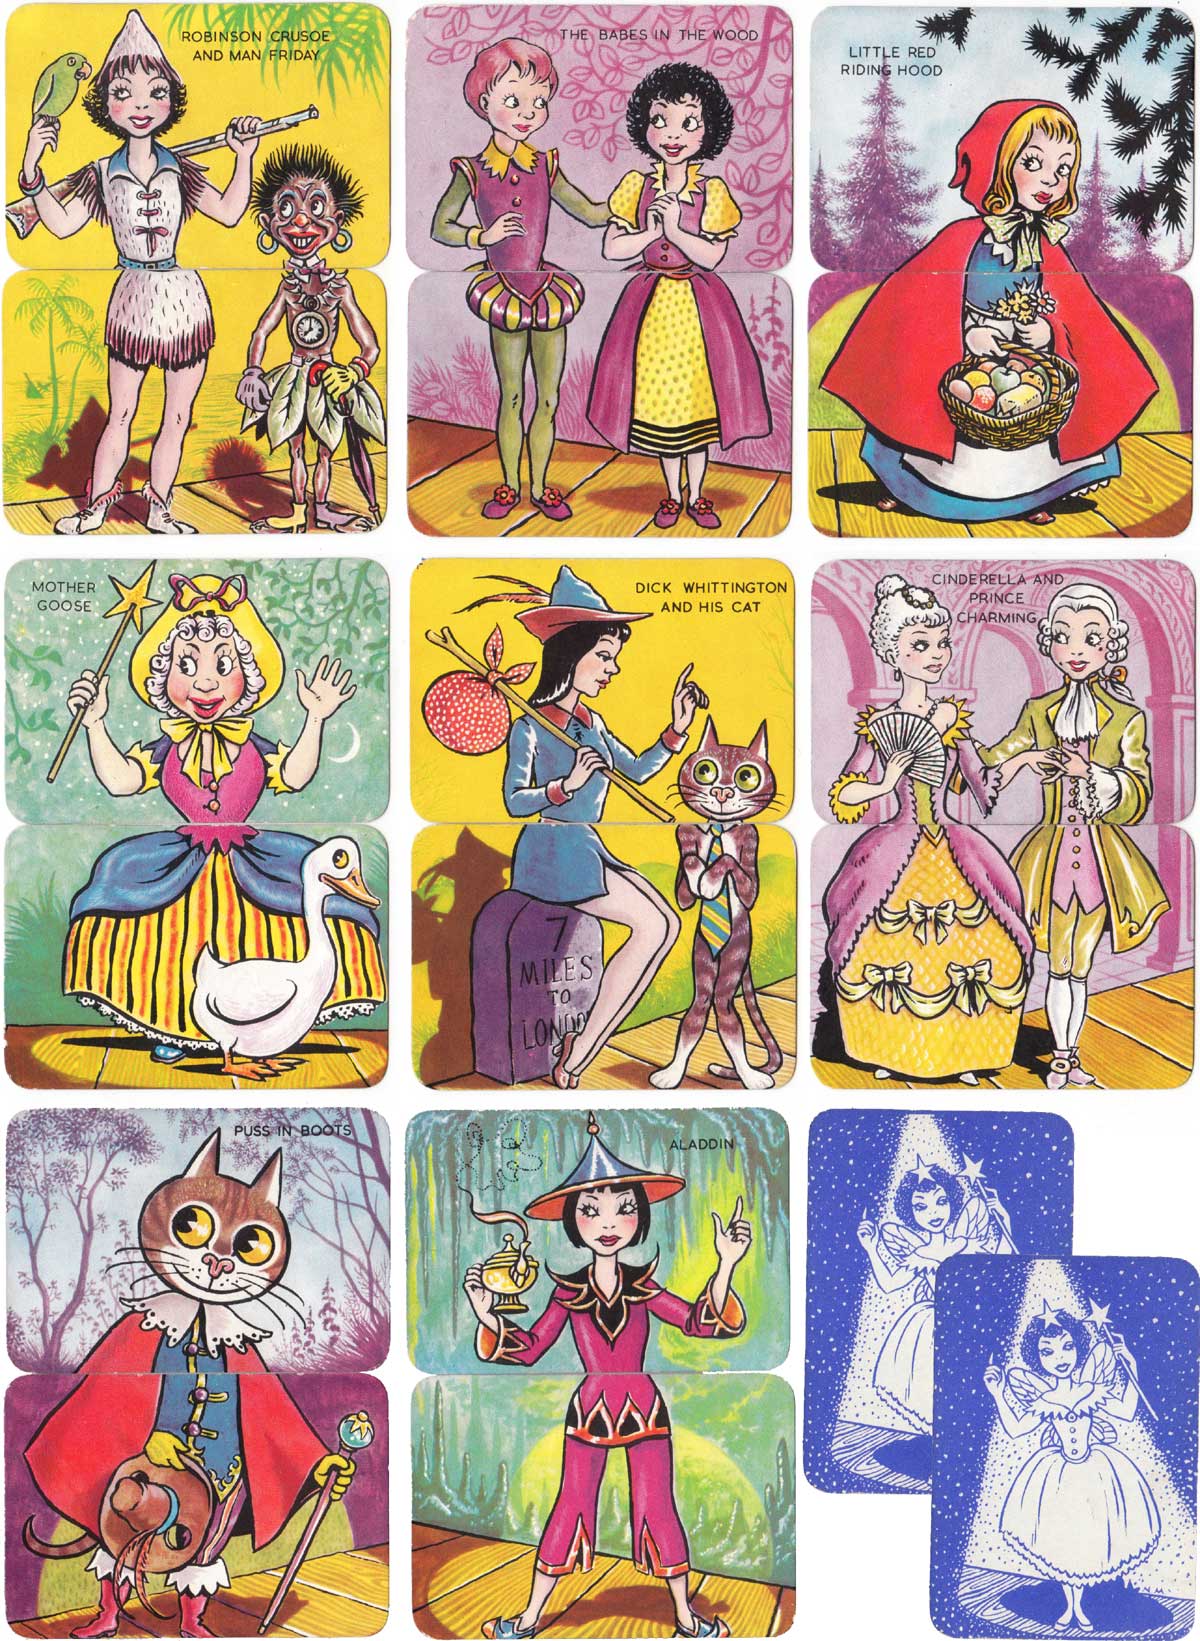 Panto card game published by Pepys Games, 1956